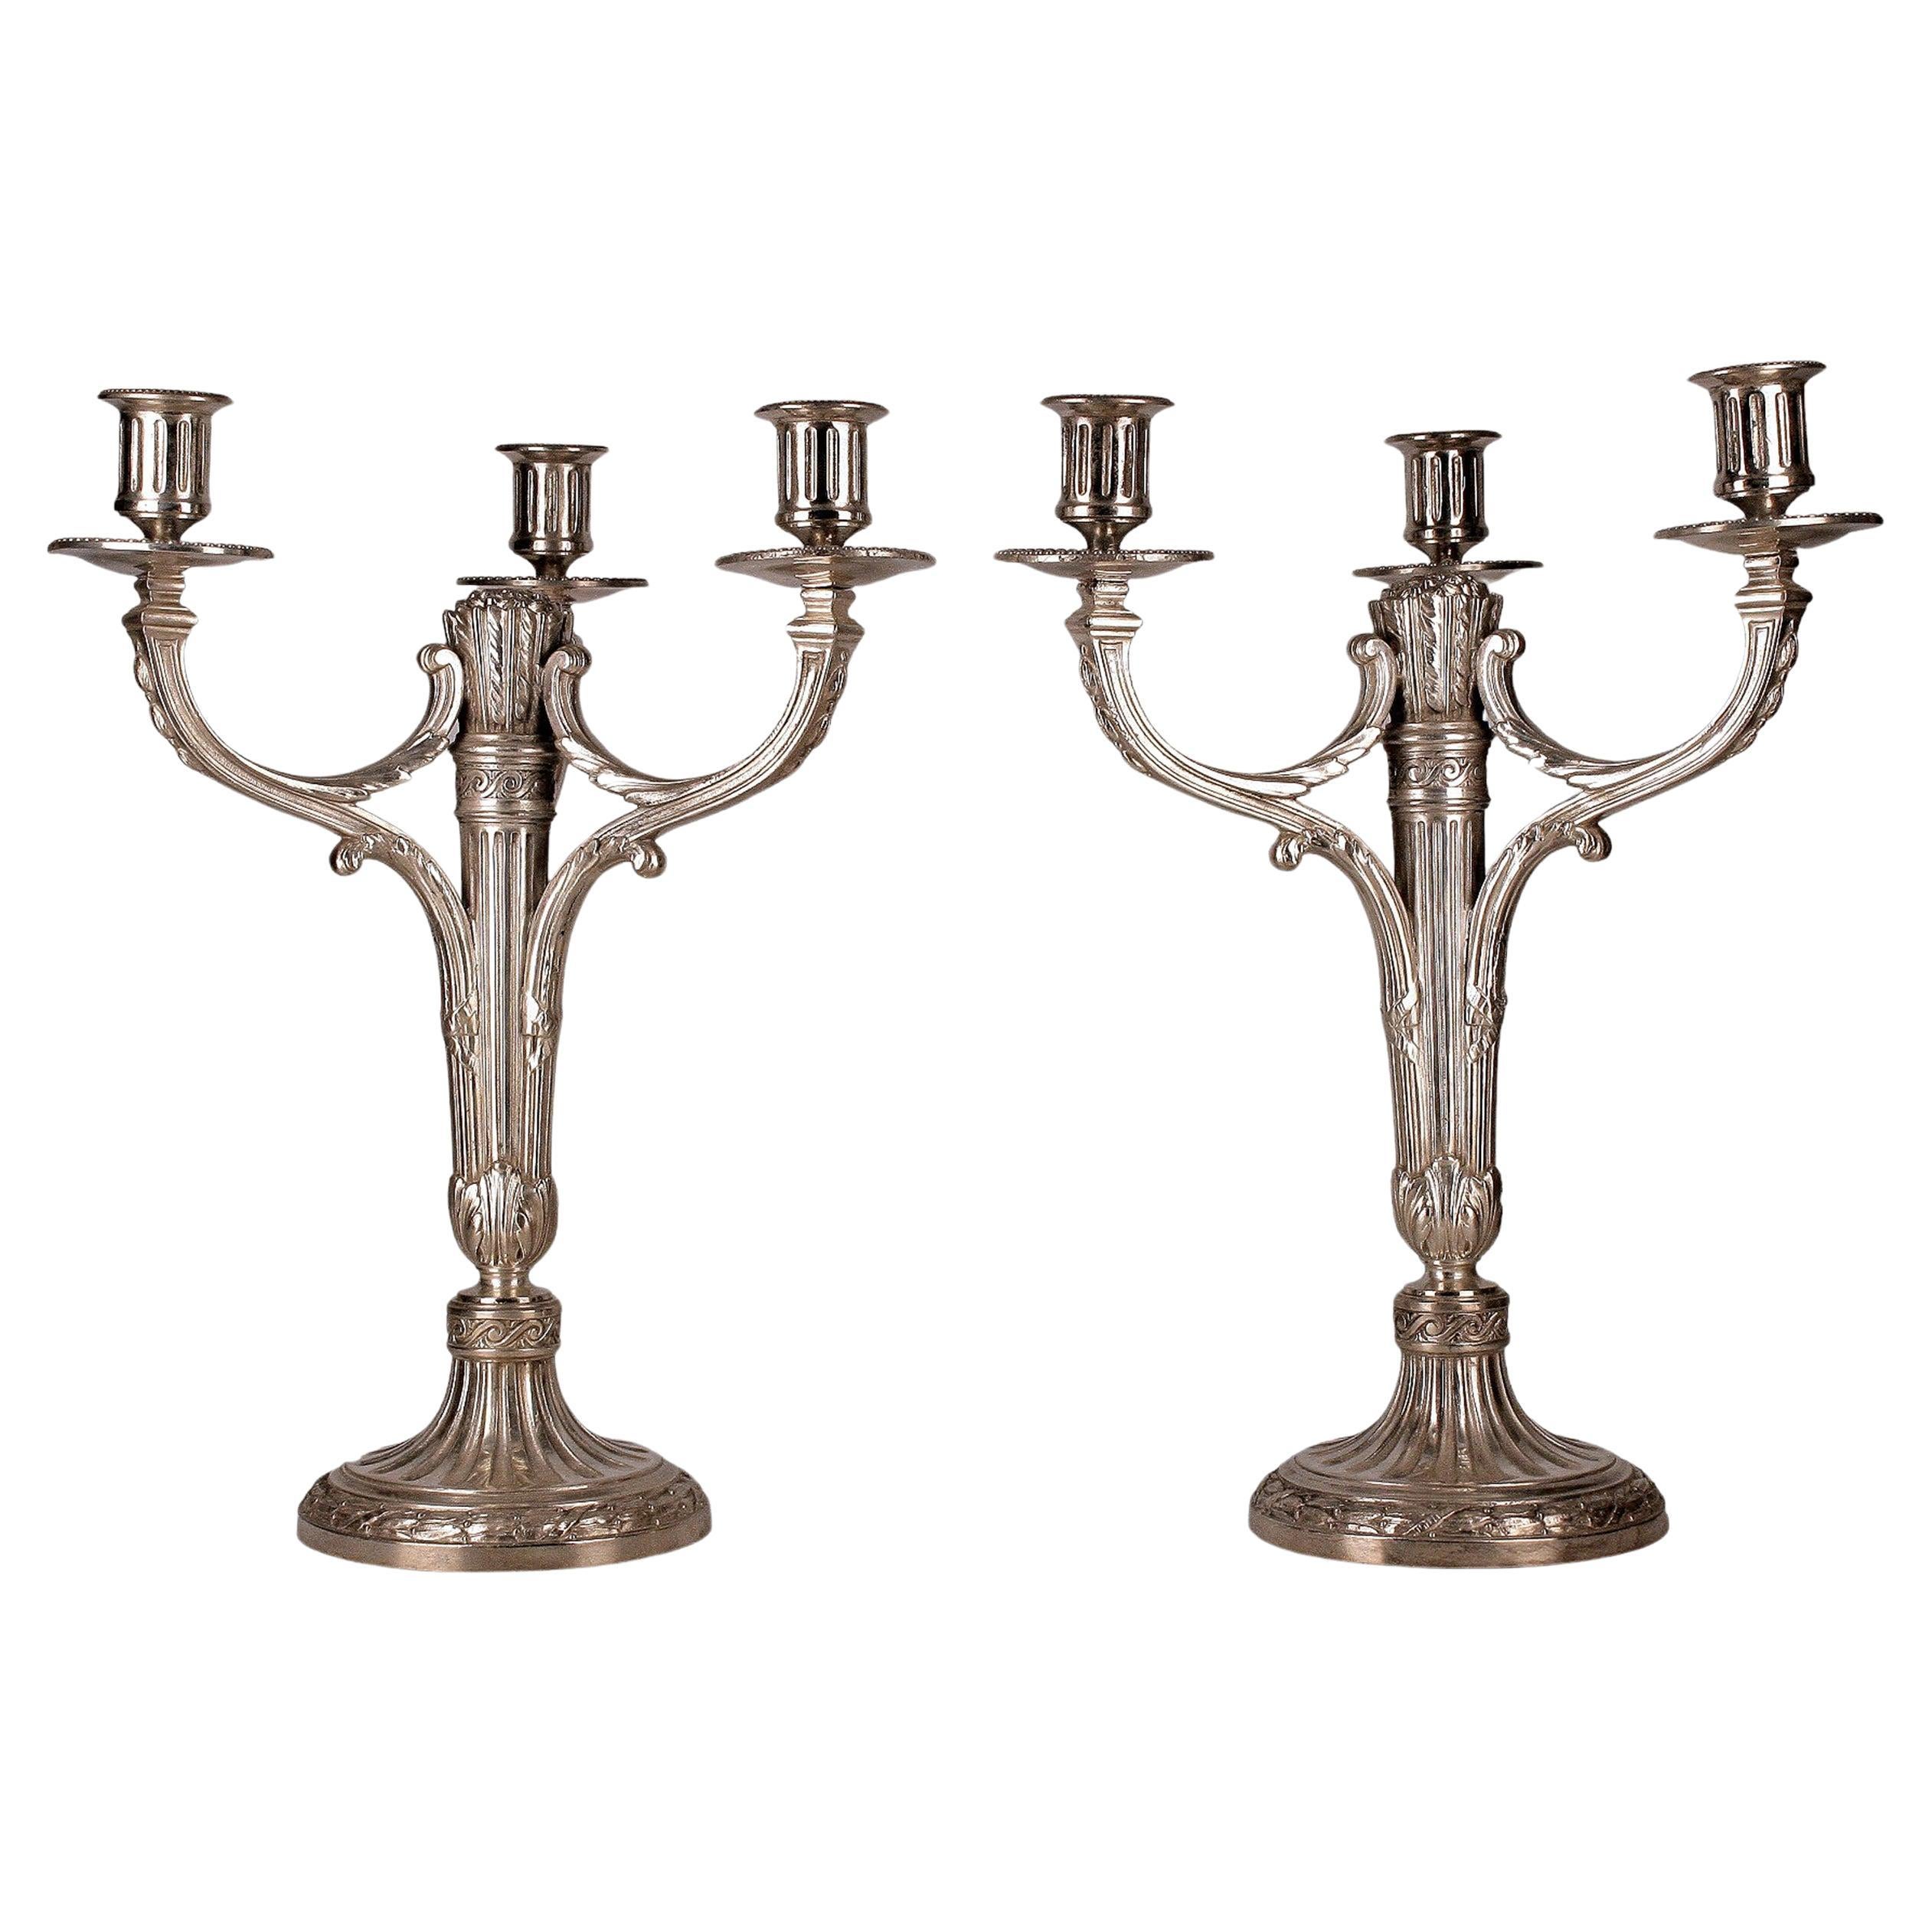 Pair of Early 20th Century Plated 3-Arms Candelabras from France by Christofle